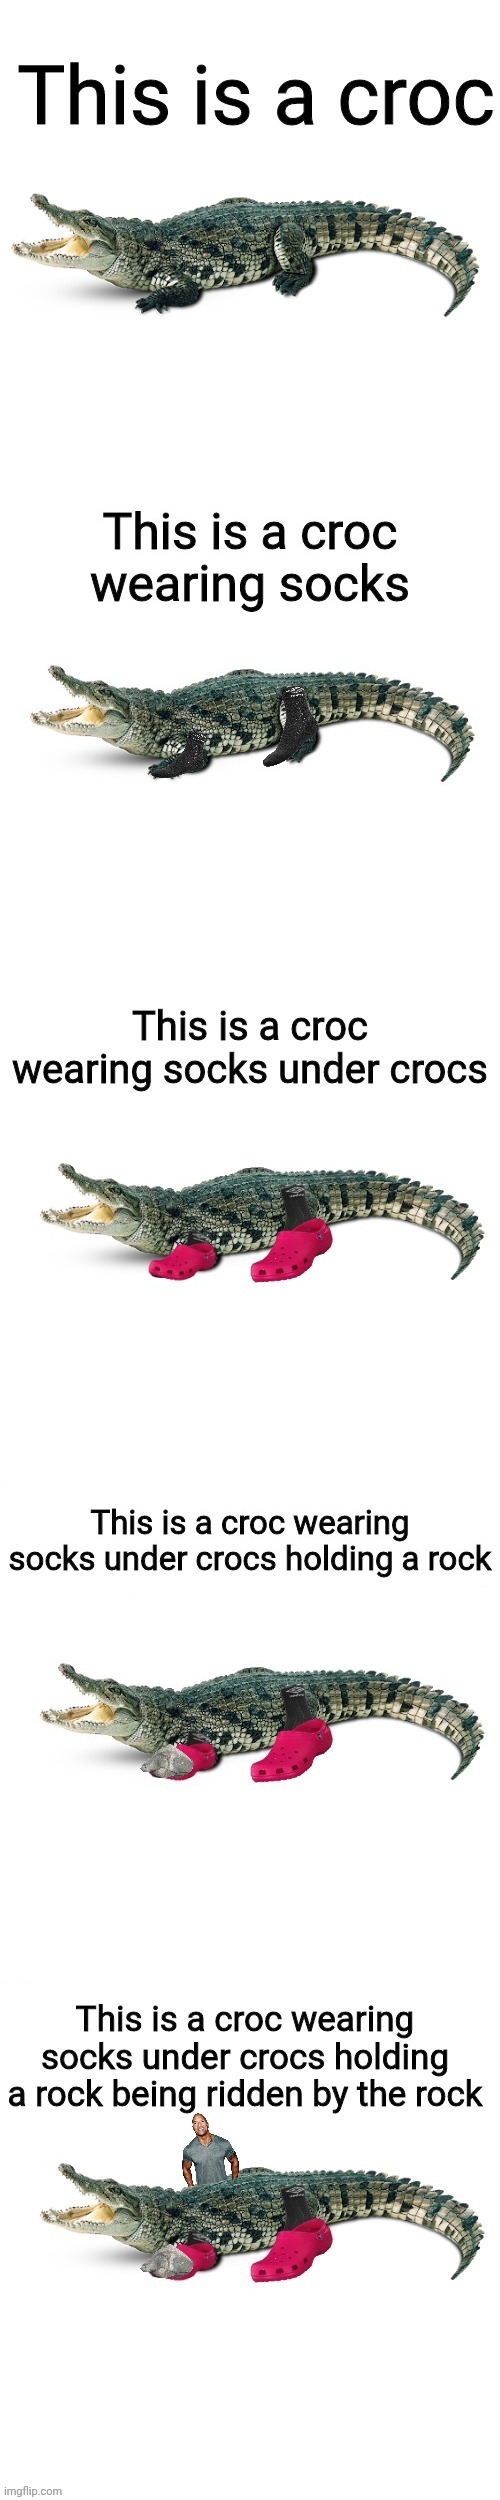 Meanwhile in florida | image tagged in crocodile,funny,memes,funny memes,meanwhile in florida,the rock | made w/ Imgflip meme maker